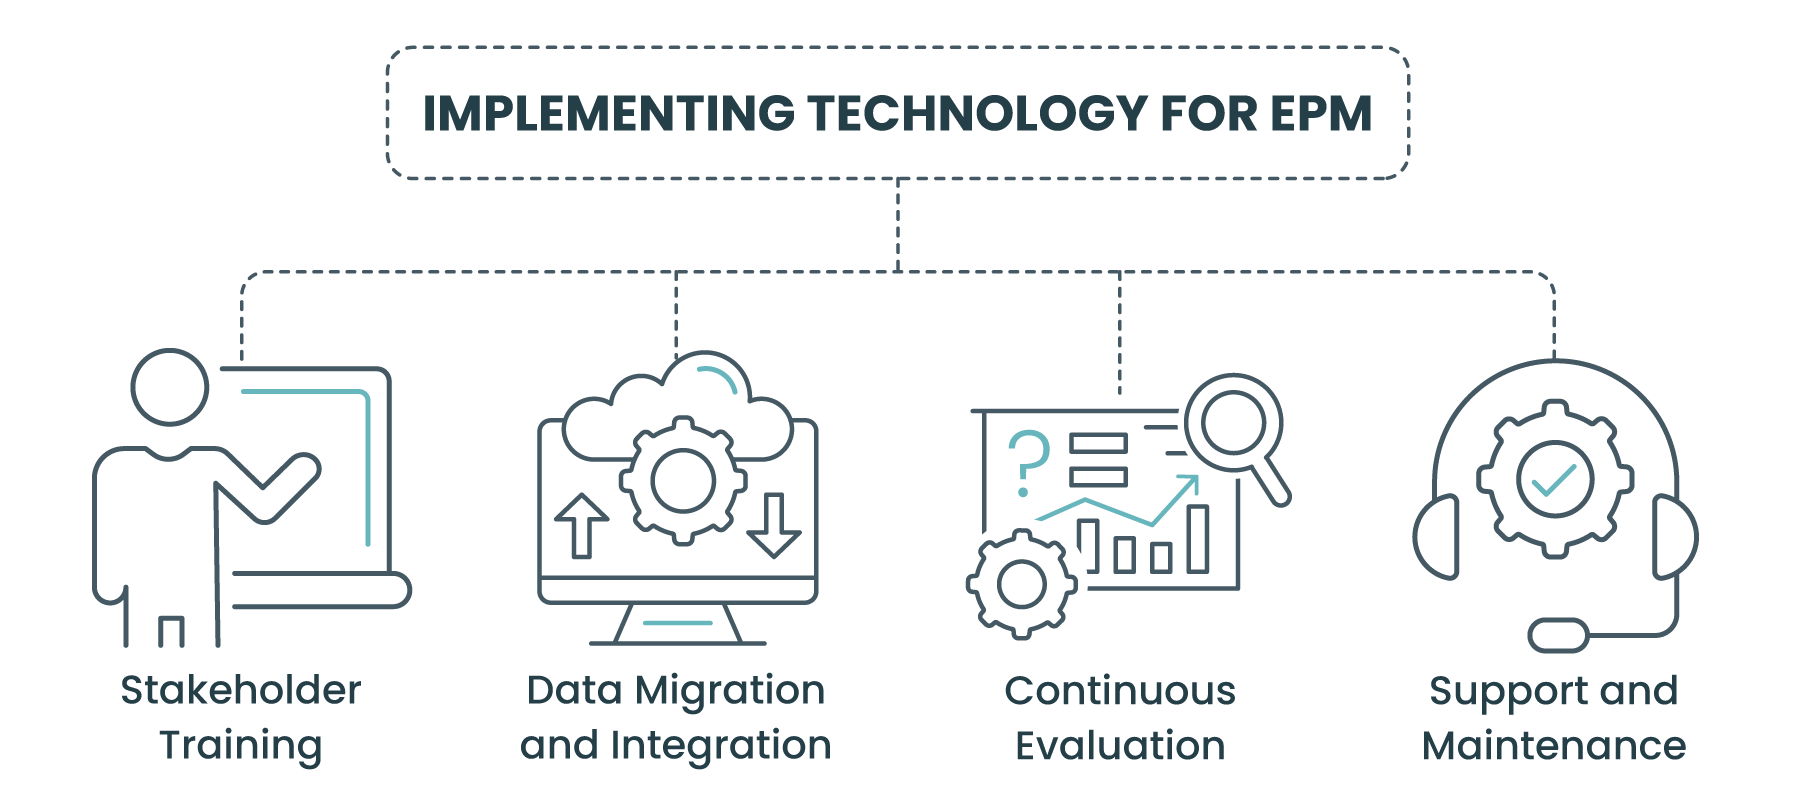 Implementing Technology for EPM